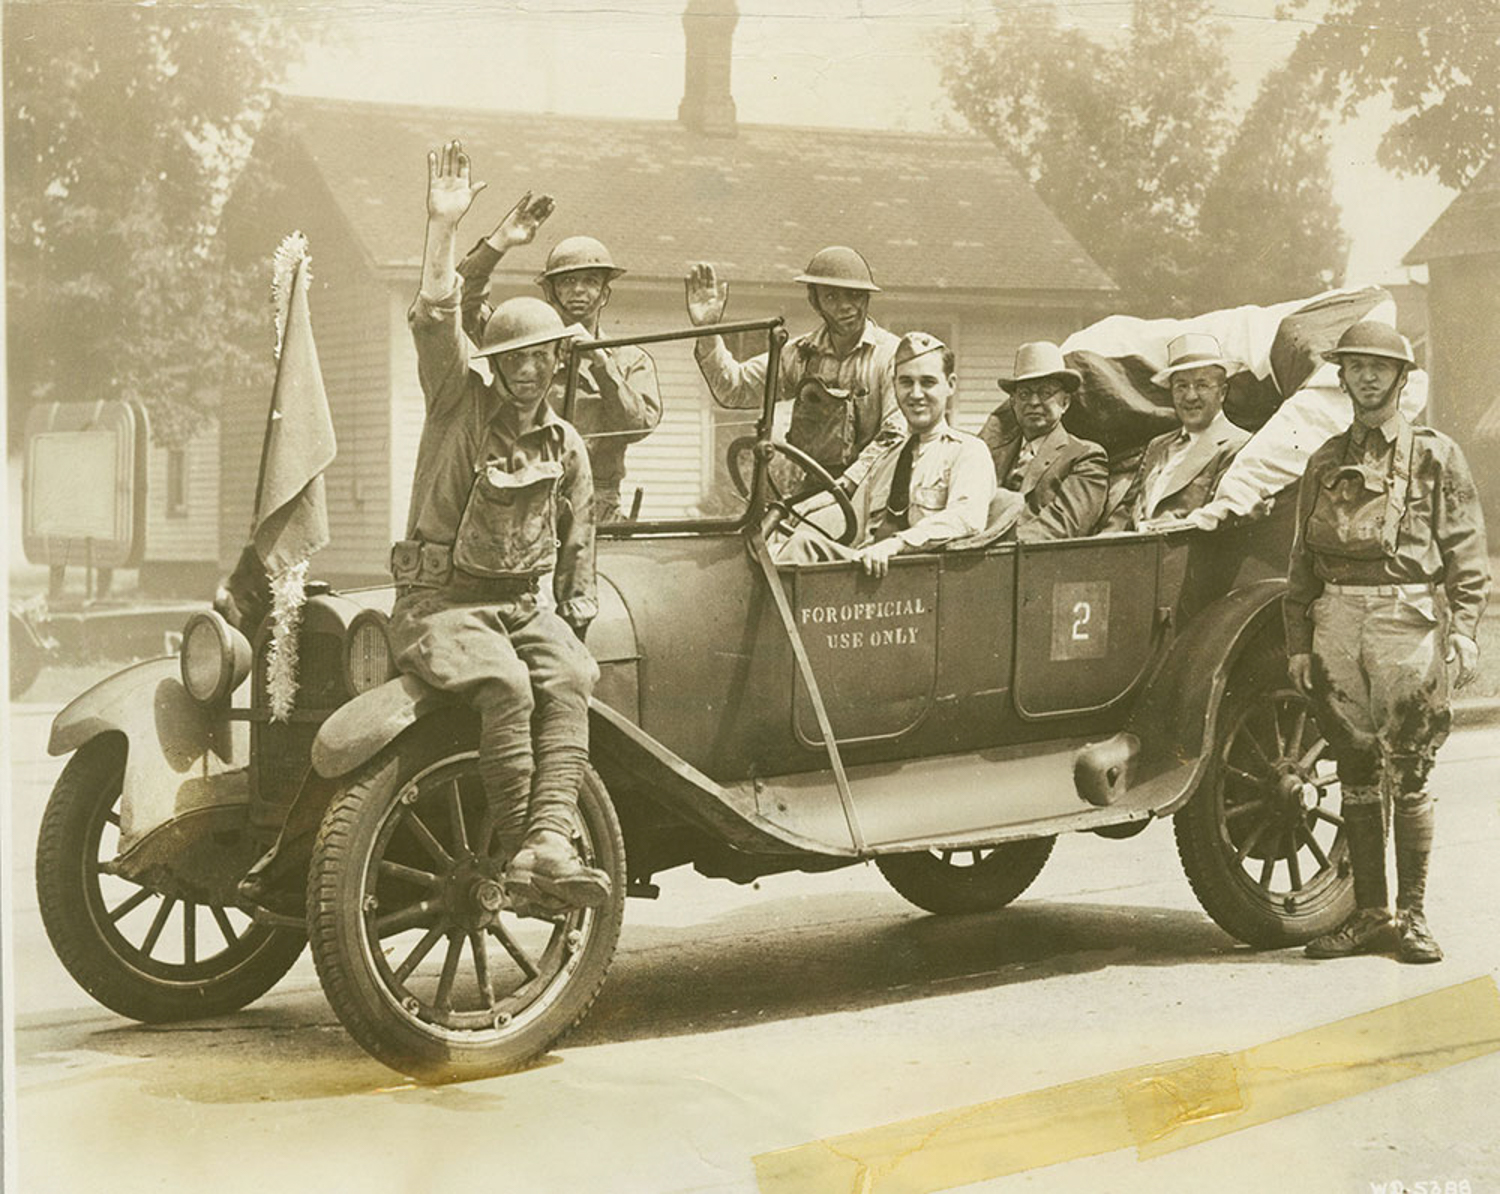 Dodge automobiles were popular with the US Army both in the pursuit of Pancho Villa and in WWI. 